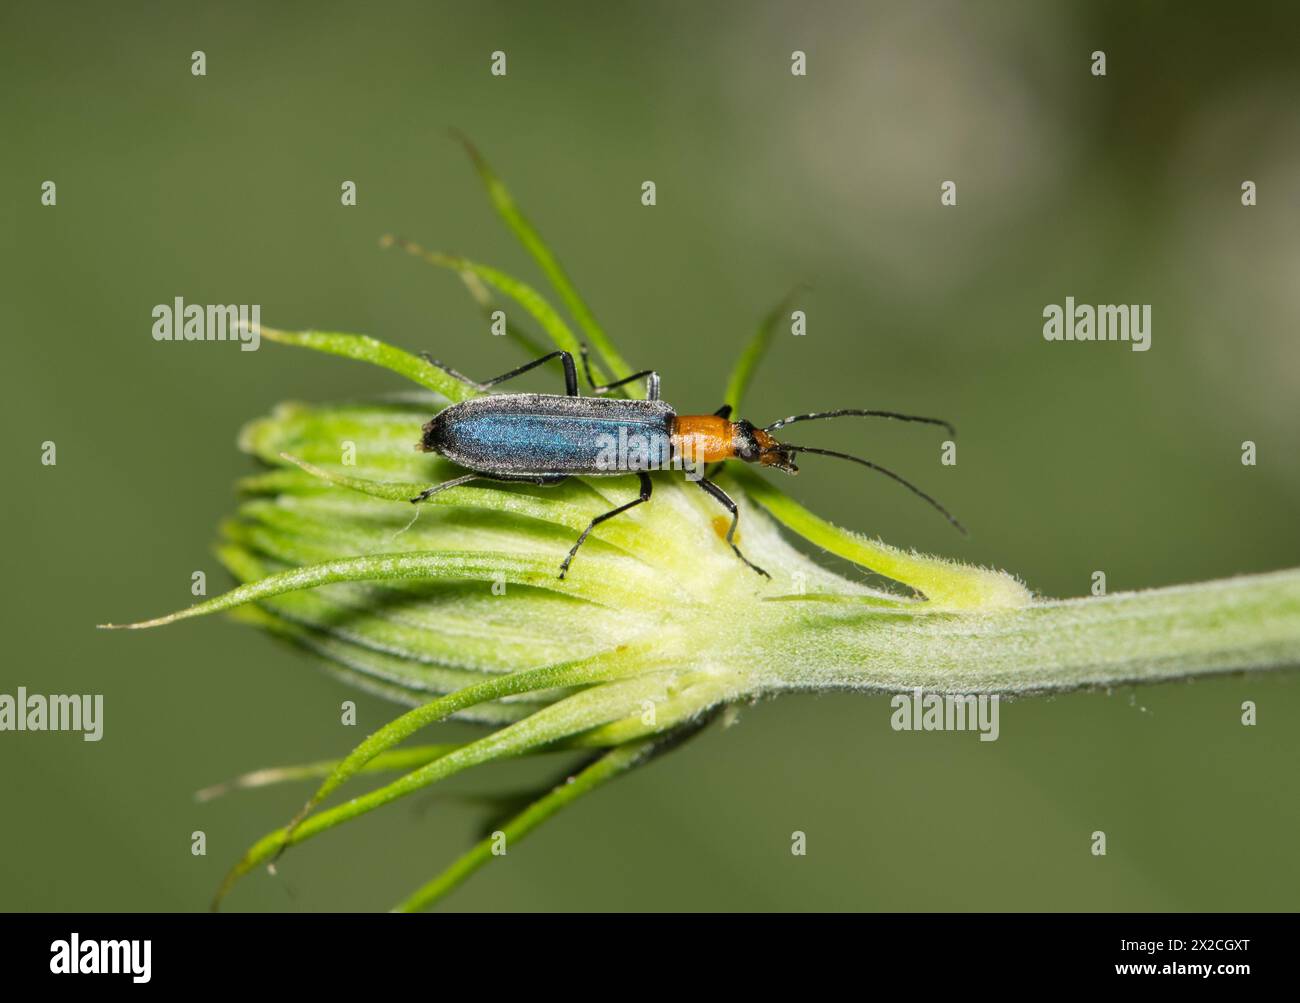 False blister beetle (Heliocis repanda) insect on flower bud, nature Springtime pest control agriculture. Stock Photo